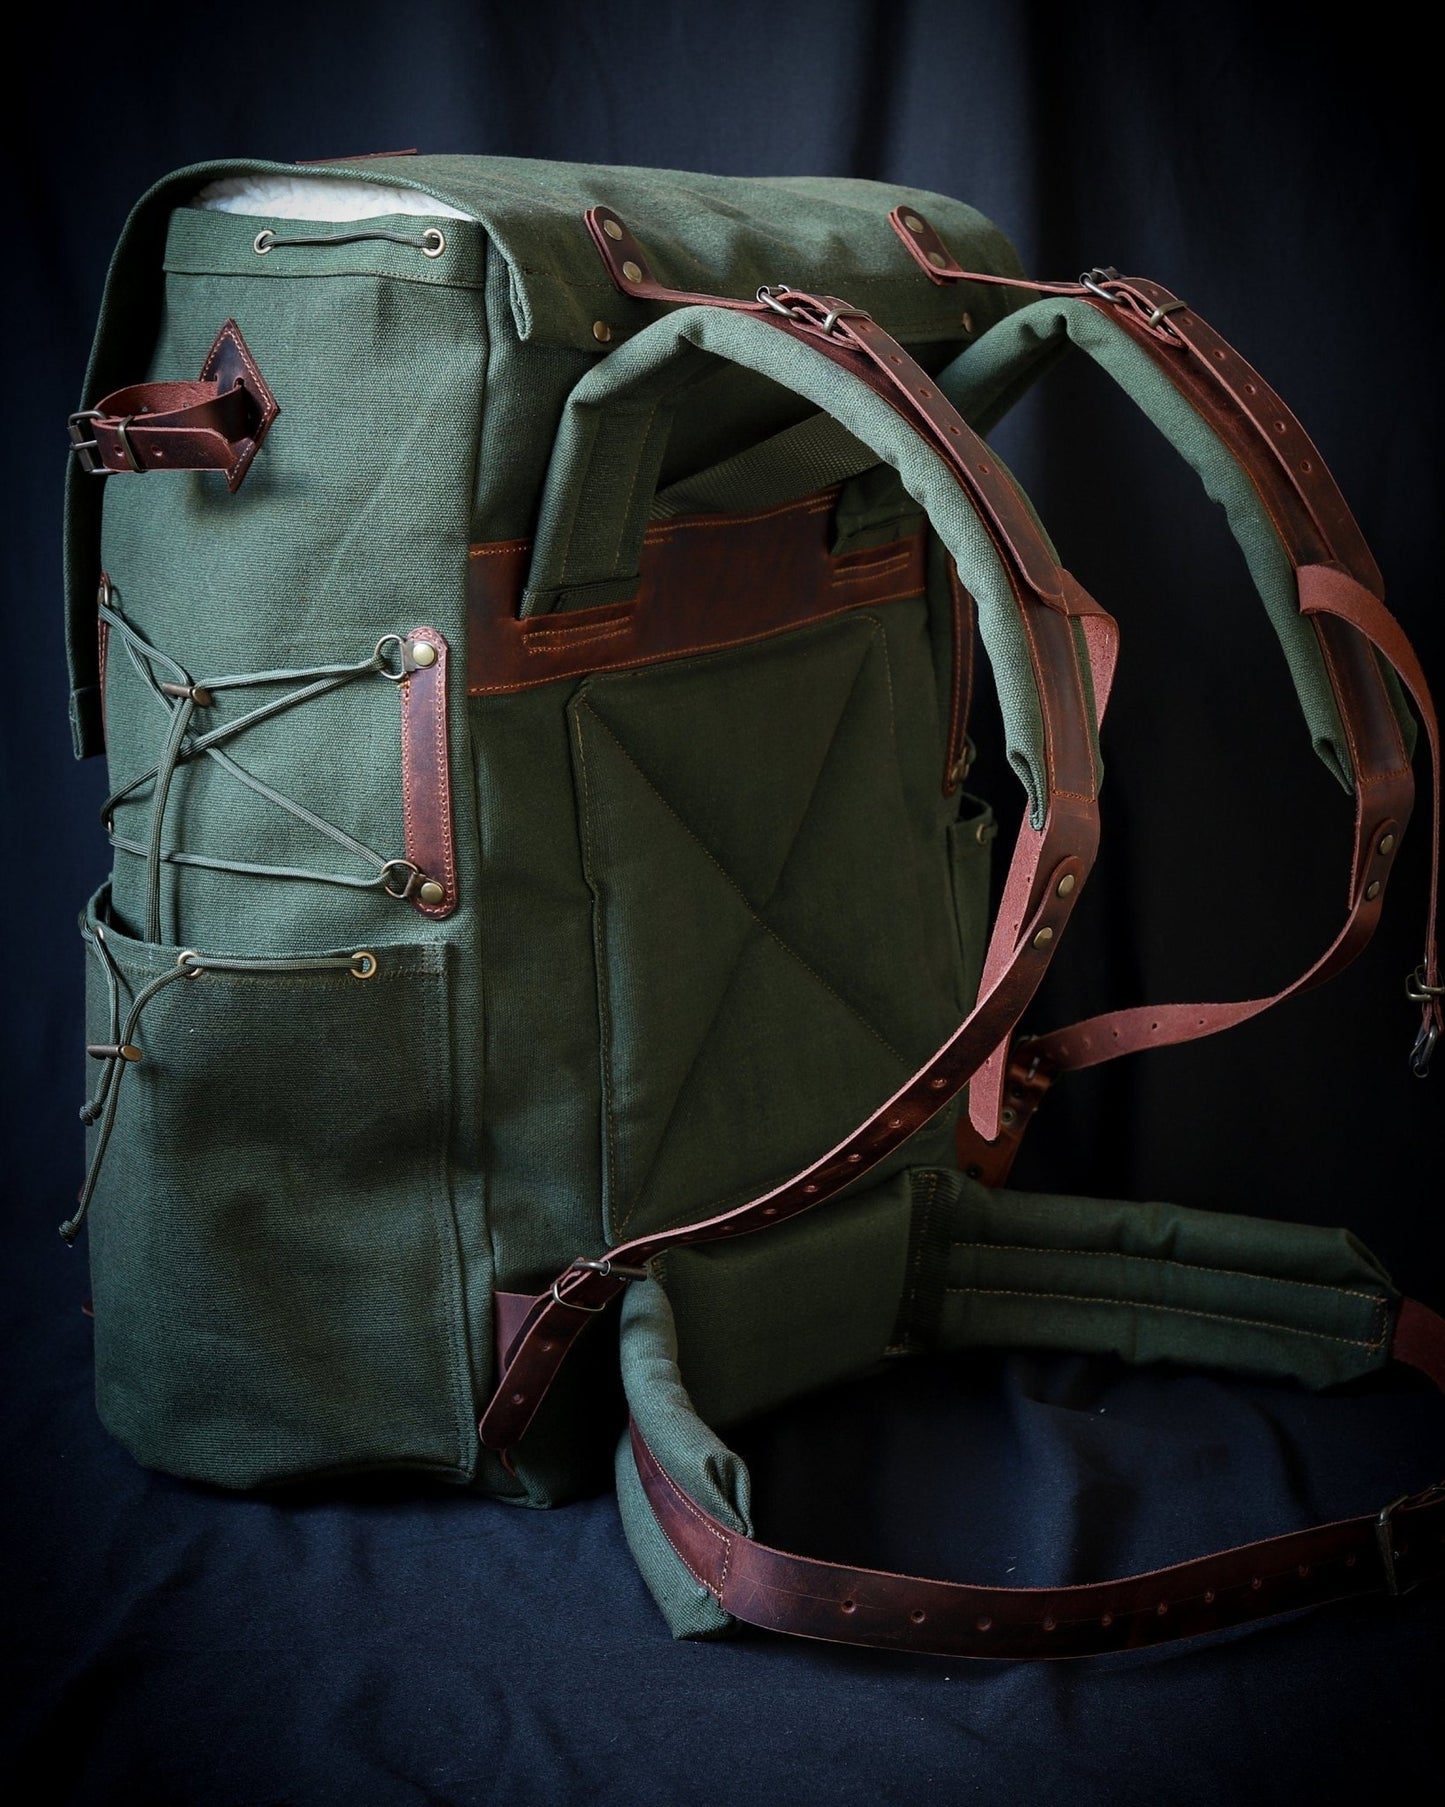 50L | 3 Pieces Left | Green, Brown, Dhaki Colours | Handmade Leather, Waxed Canvas Backpack for Travel, Camping, Bushcraft | Personalization bushcraft - camping - hiking backpack 99percenthandmade   